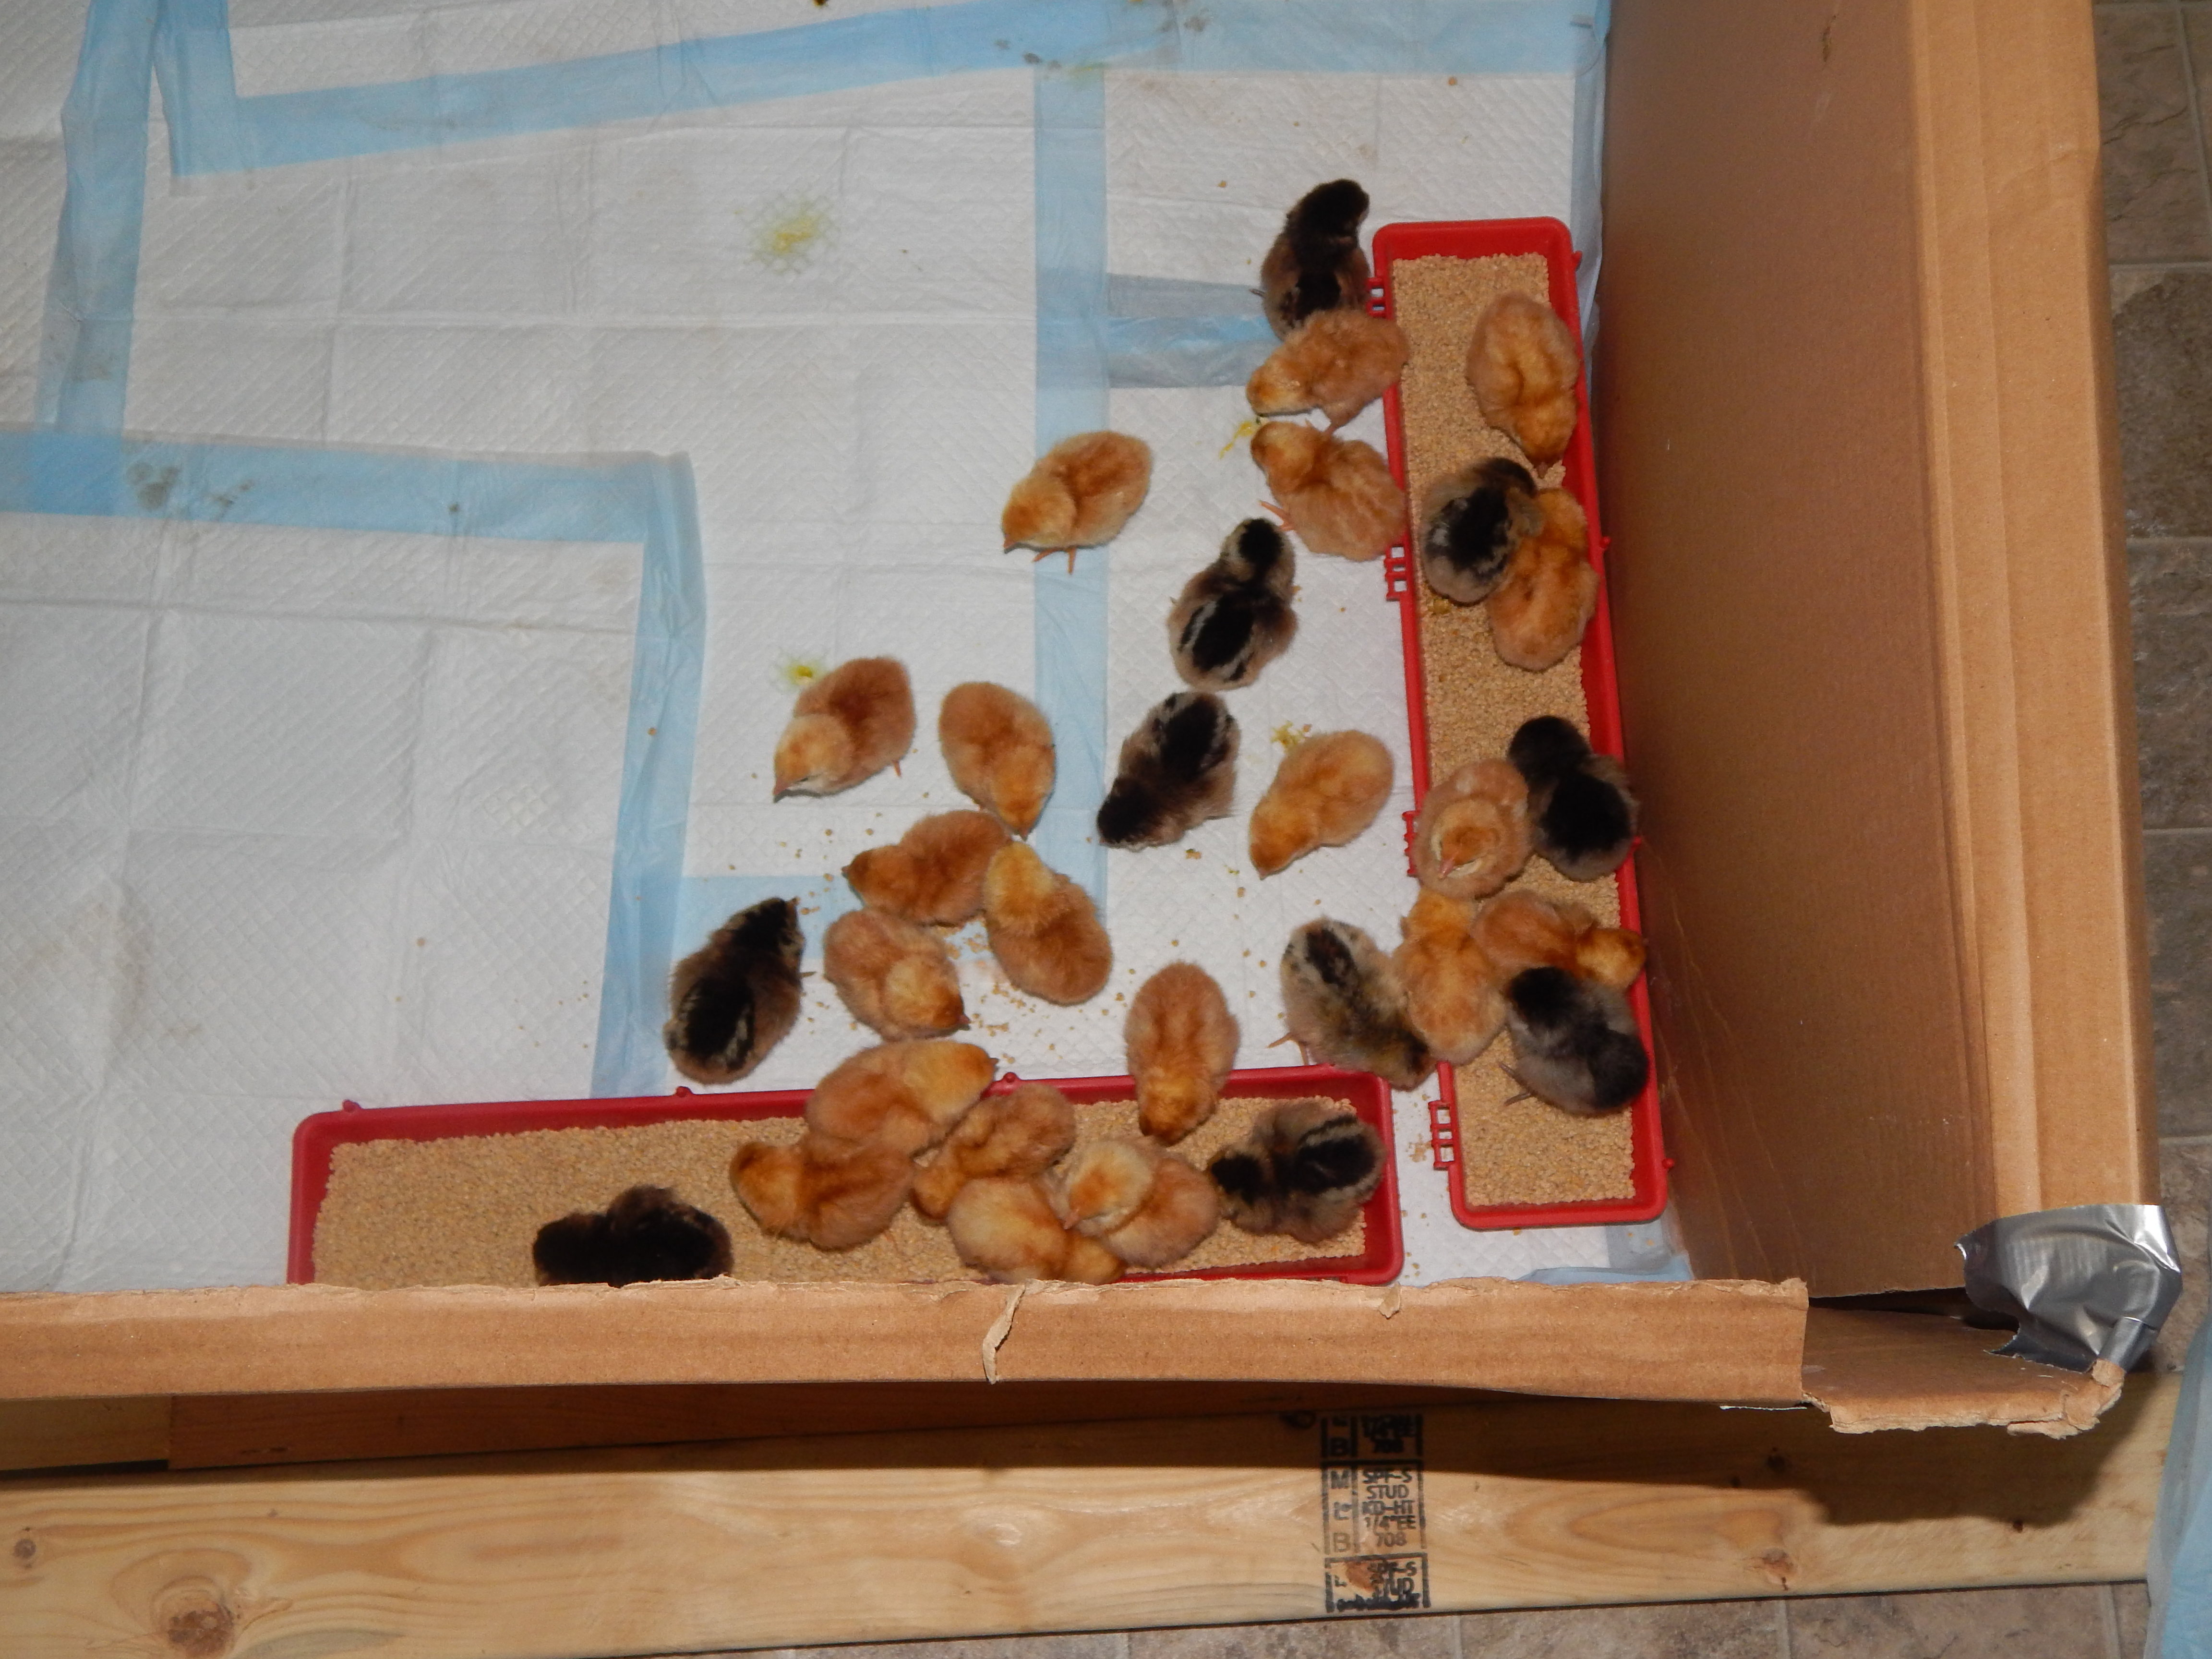 They look so tiny, I am brooding them in a boxes off section inside the coop. Really hot out so it is a little easier brooding them.